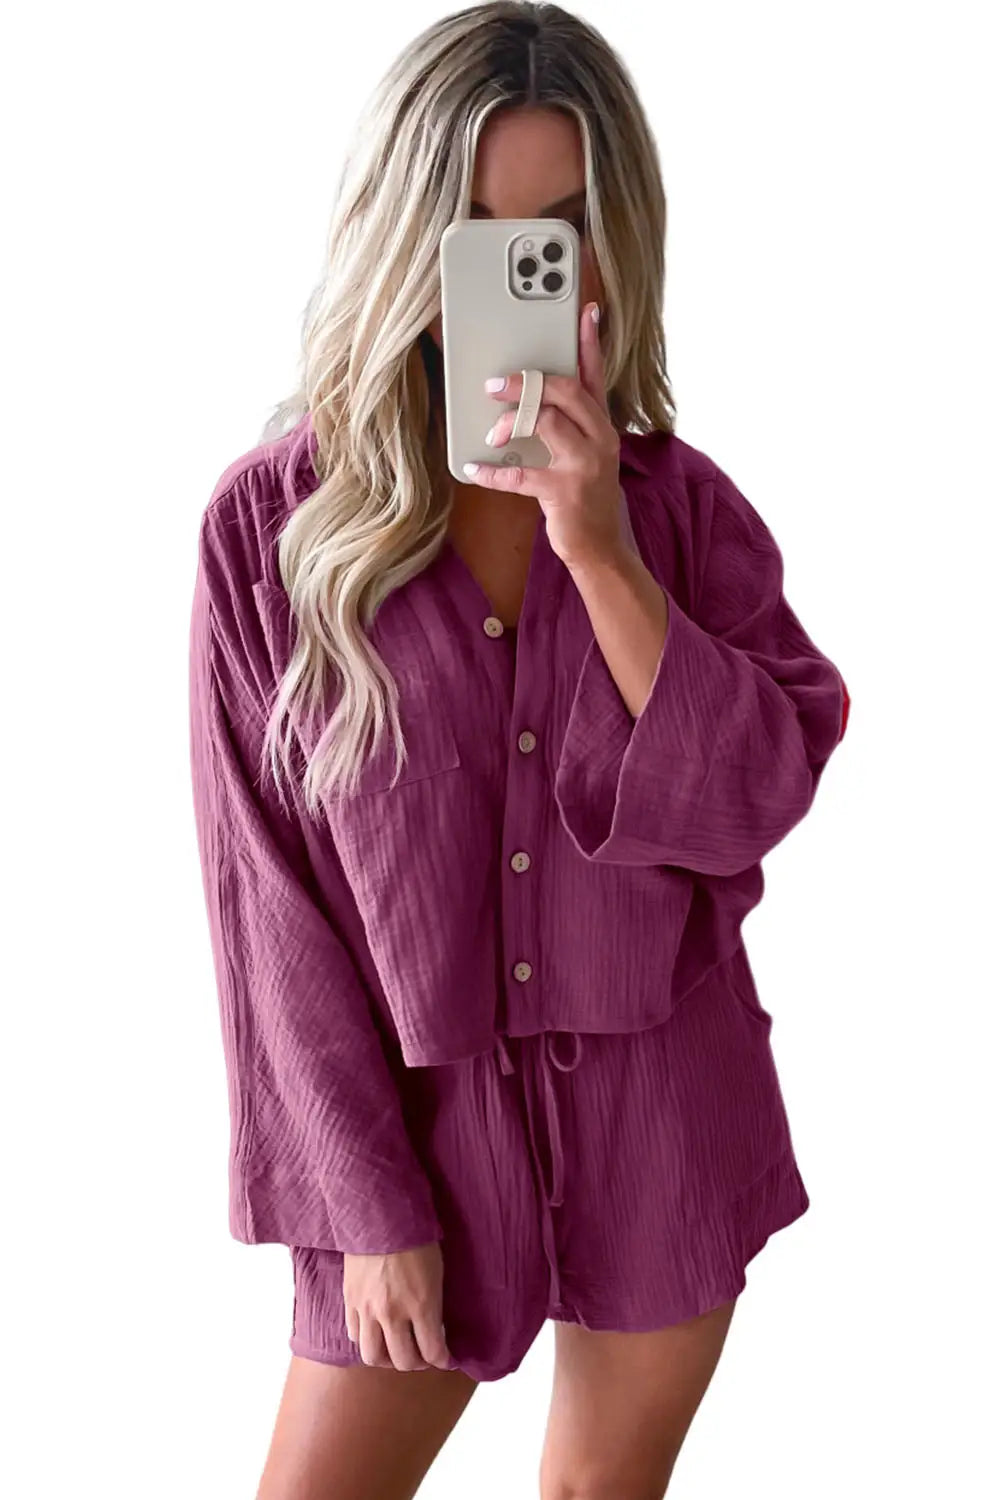 Textured dolman sleeve cropped shirt and shorts set - loungewear